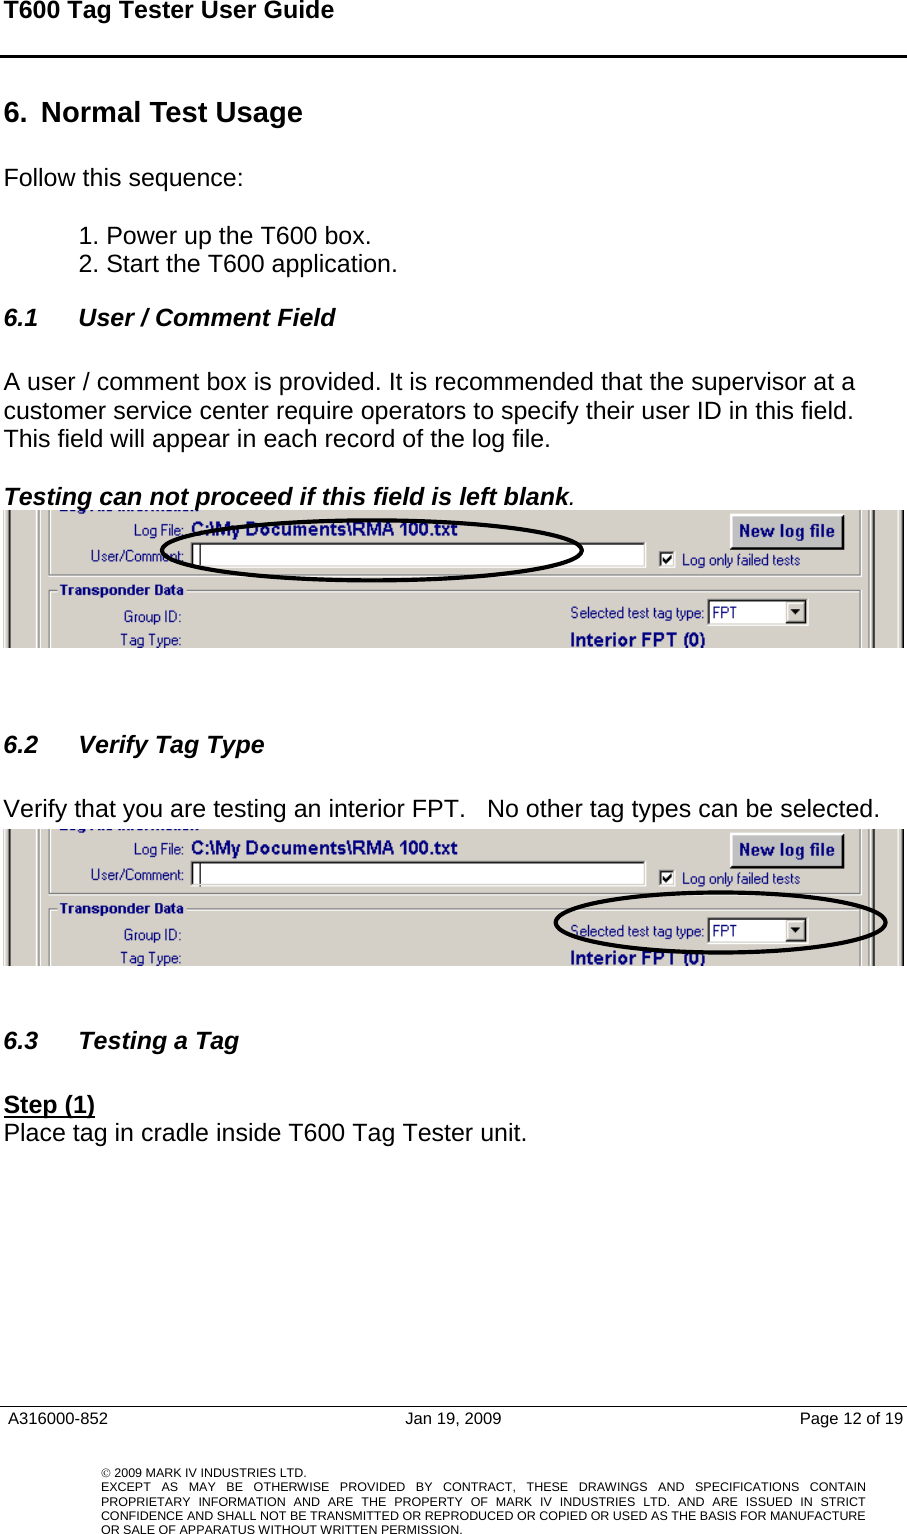 T600 Tag Tester User Guide   6.  Normal Test Usage   Follow this sequence:   1. Power up the T600 box.  2. Start the T600 application.  6.1  User / Comment Field  A user / comment box is provided. It is recommended that the supervisor at a customer service center require operators to specify their user ID in this field. This field will appear in each record of the log file.  Testing can not proceed if this field is left blank.     A316000-852  Jan 19, 2009  Page 12 of 19    © 2009 MARK IV INDUSTRIES LTD. EXCEPT AS MAY BE OTHERWISE PROVIDED BY CONTRACT, THESE DRAWINGS AND SPECIFICATIONS CONTAINPROPRIETARY INFORMATION AND ARE THE PROPERTY OF MARK IV INDUSTRIES LTD. AND ARE ISSUED IN STRICT CONFIDENCE AND SHALL NOT BE TRANSMITTED OR REPRODUCED OR COPIED OR USED AS THE BASIS FOR MANUFACTUREOR SALE OF APPARATUS WITHOUT WRITTEN PERMISSION.  6.2  Verify Tag Type   Verify that you are testing an interior FPT.   No other tag types can be selected.     6.3  Testing a Tag   Step (1) Place tag in cradle inside T600 Tag Tester unit. 